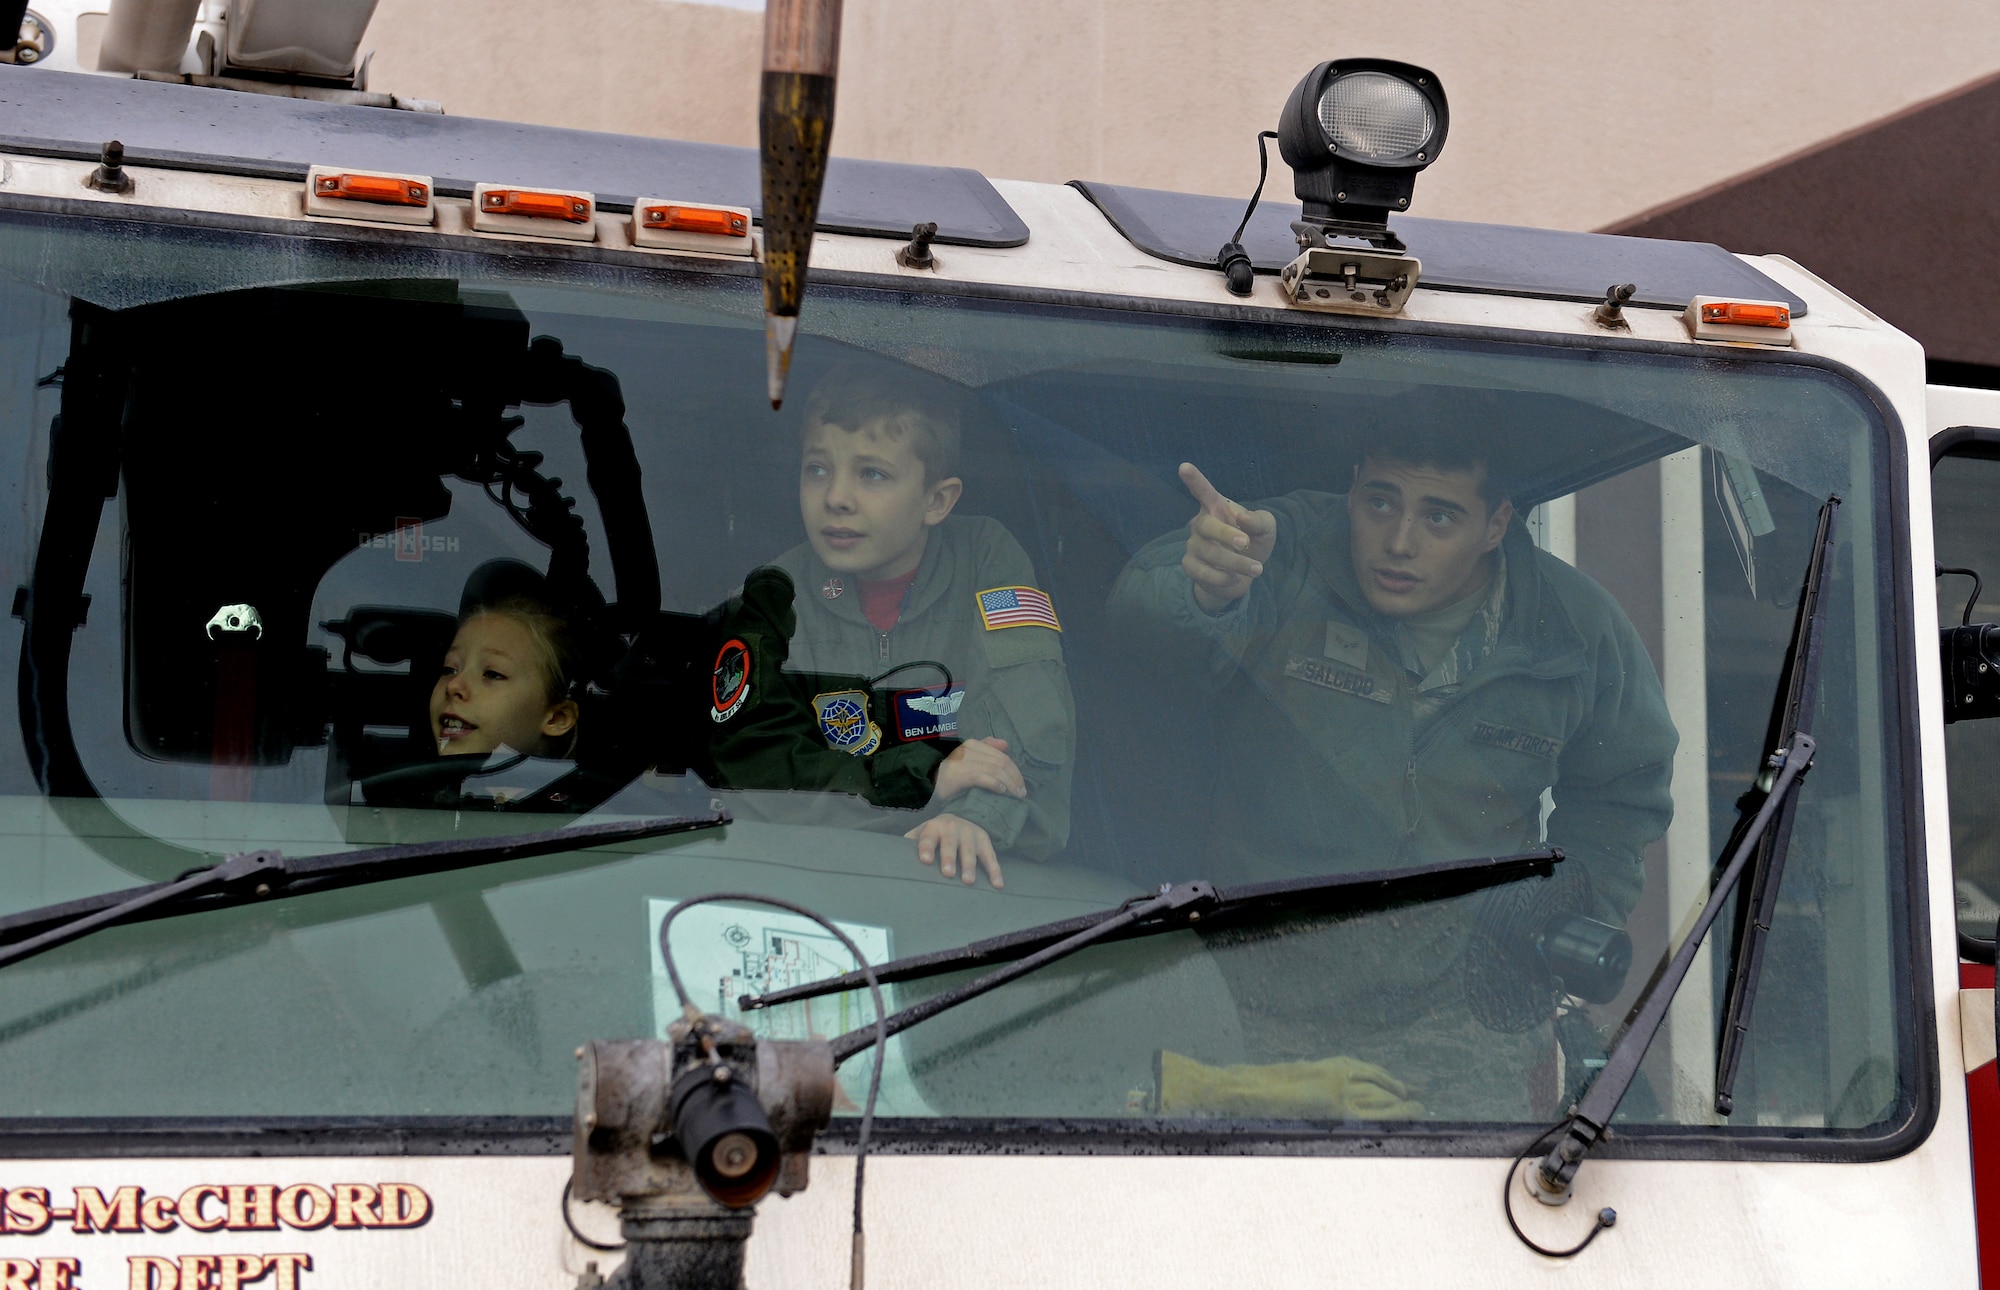 Ben Lambertson (middle) and his sister Maddie (left), look out over the flight line from inside a fire truck demo during his Pilot for a Day visit Oct. 7, 2016 at Joint Base Lewis-McChord, Wash. Ben was honored as Pilot for a Day and was able to tour multiple organizations on McChord Field. (U.S. Air Force photo/Senior Airman Divine Cox)